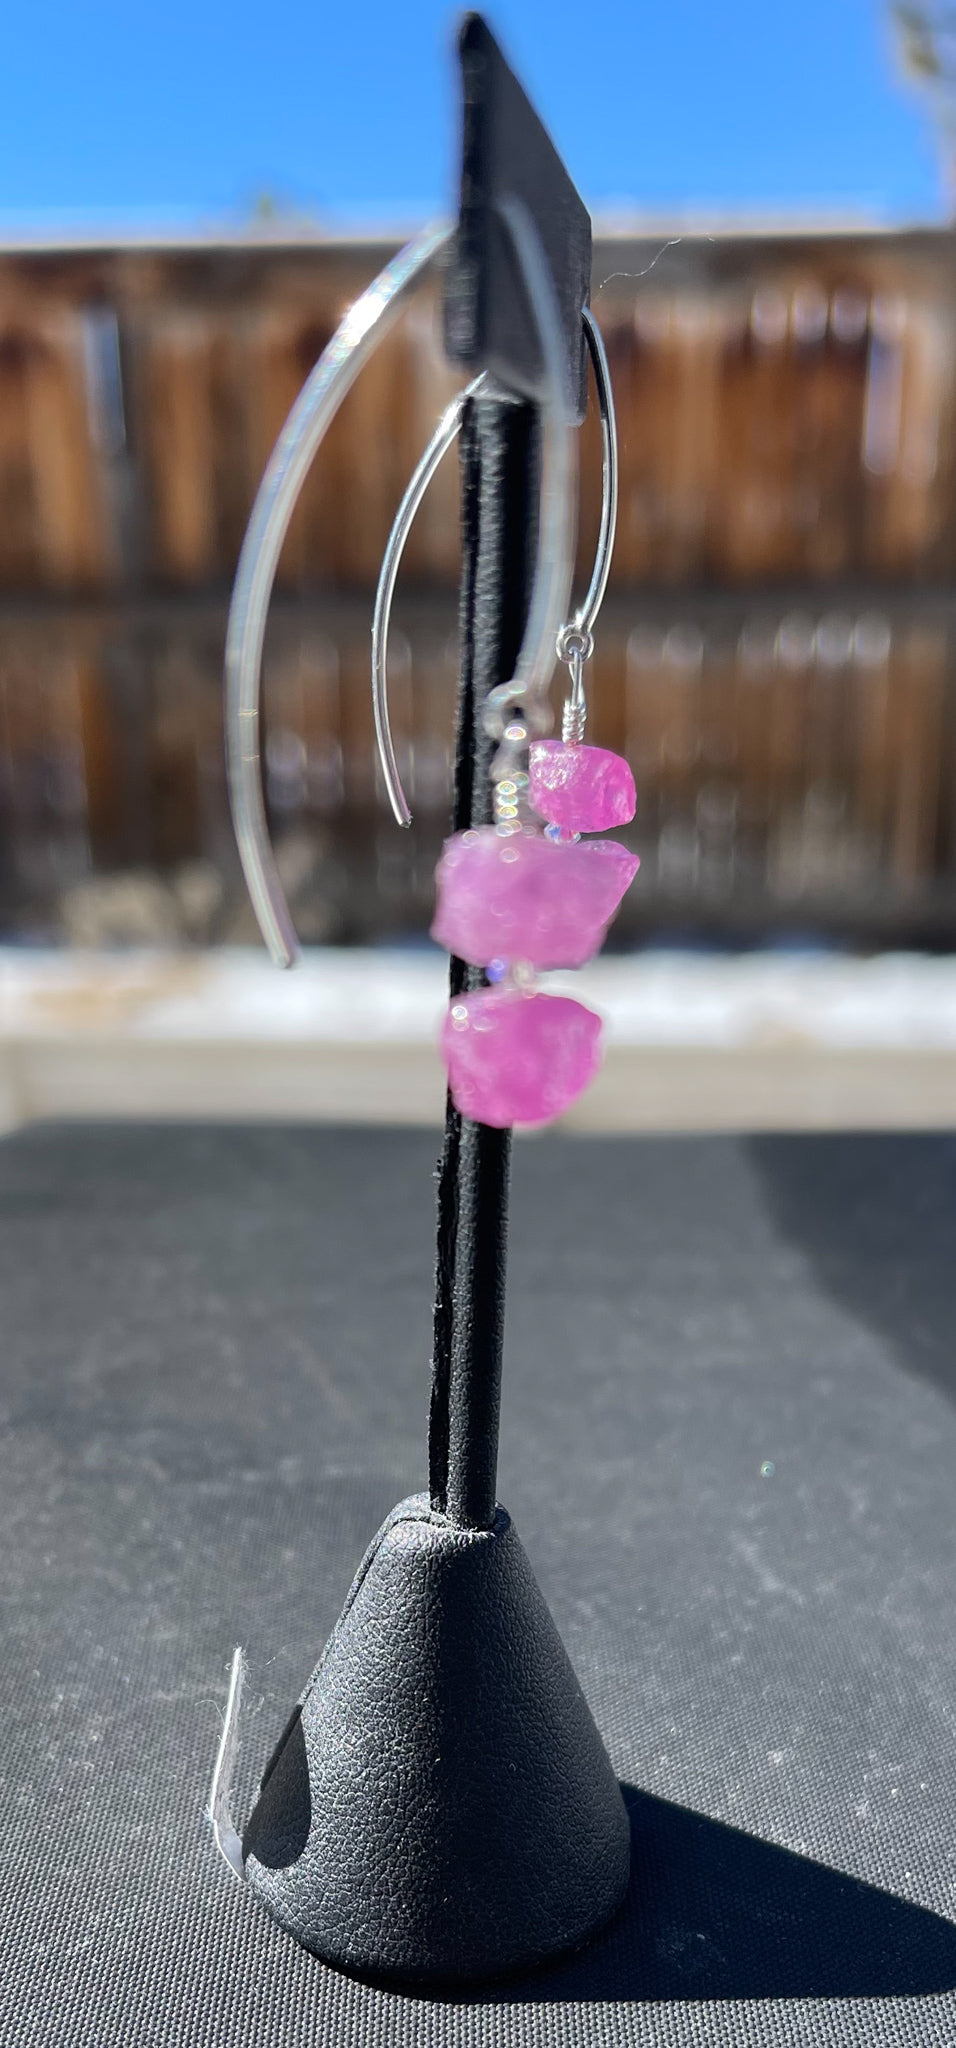 Pink Sapphire Swarovski Crystal and Sterling Silver Earrings